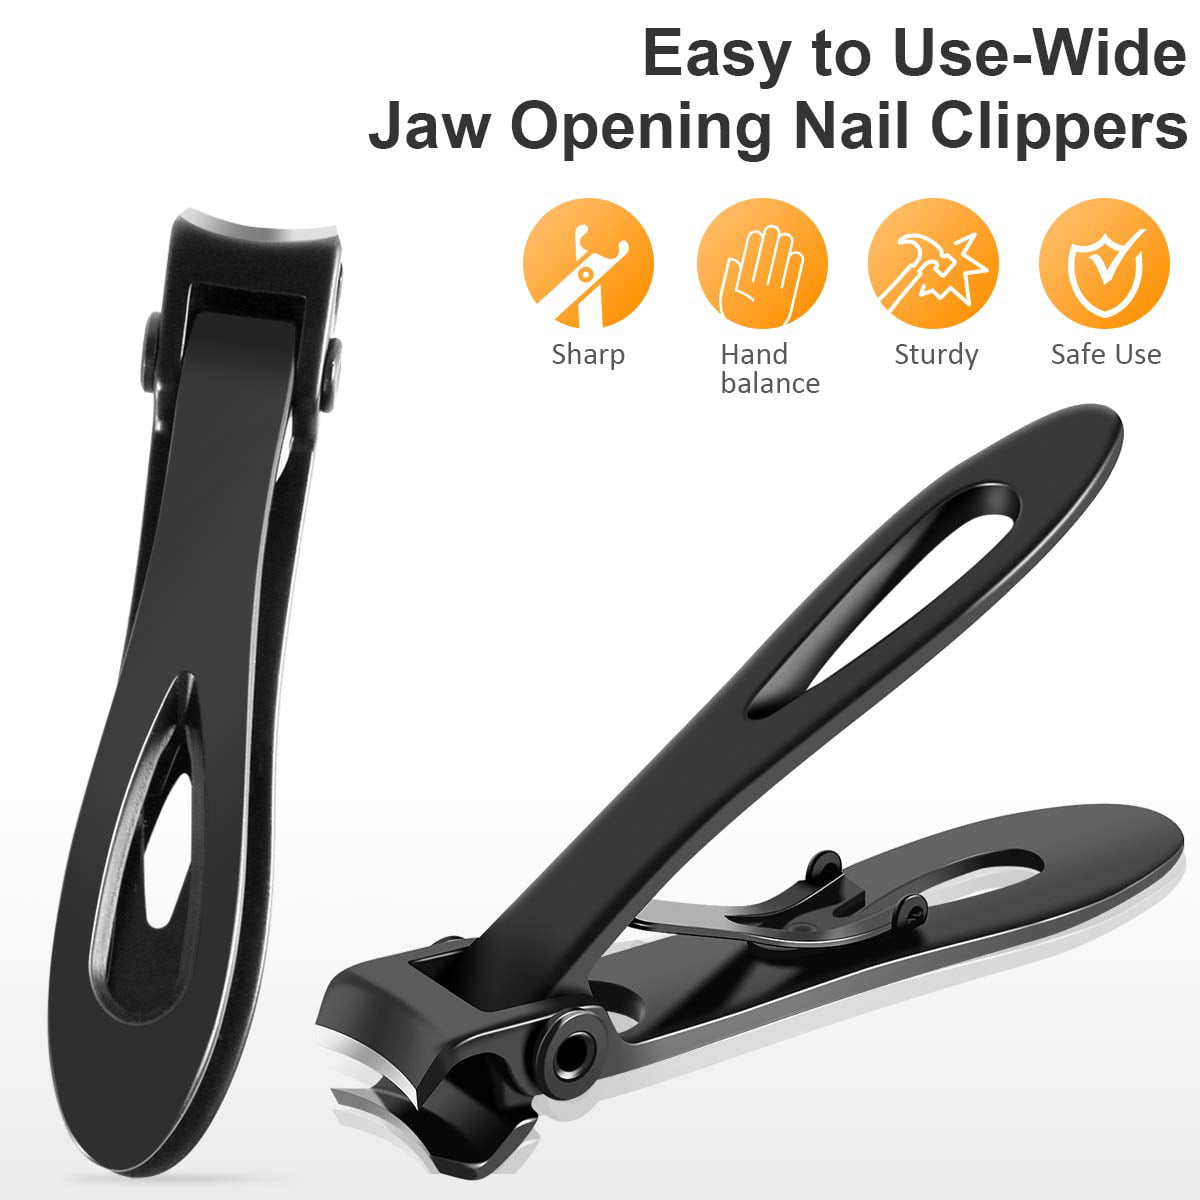 SGNEKOO Angled Head Nail Clippers Wide Jaw Opening for Hard/Thick  Fingernails and Toenails Super Sharp Curved Blades Anti-splash